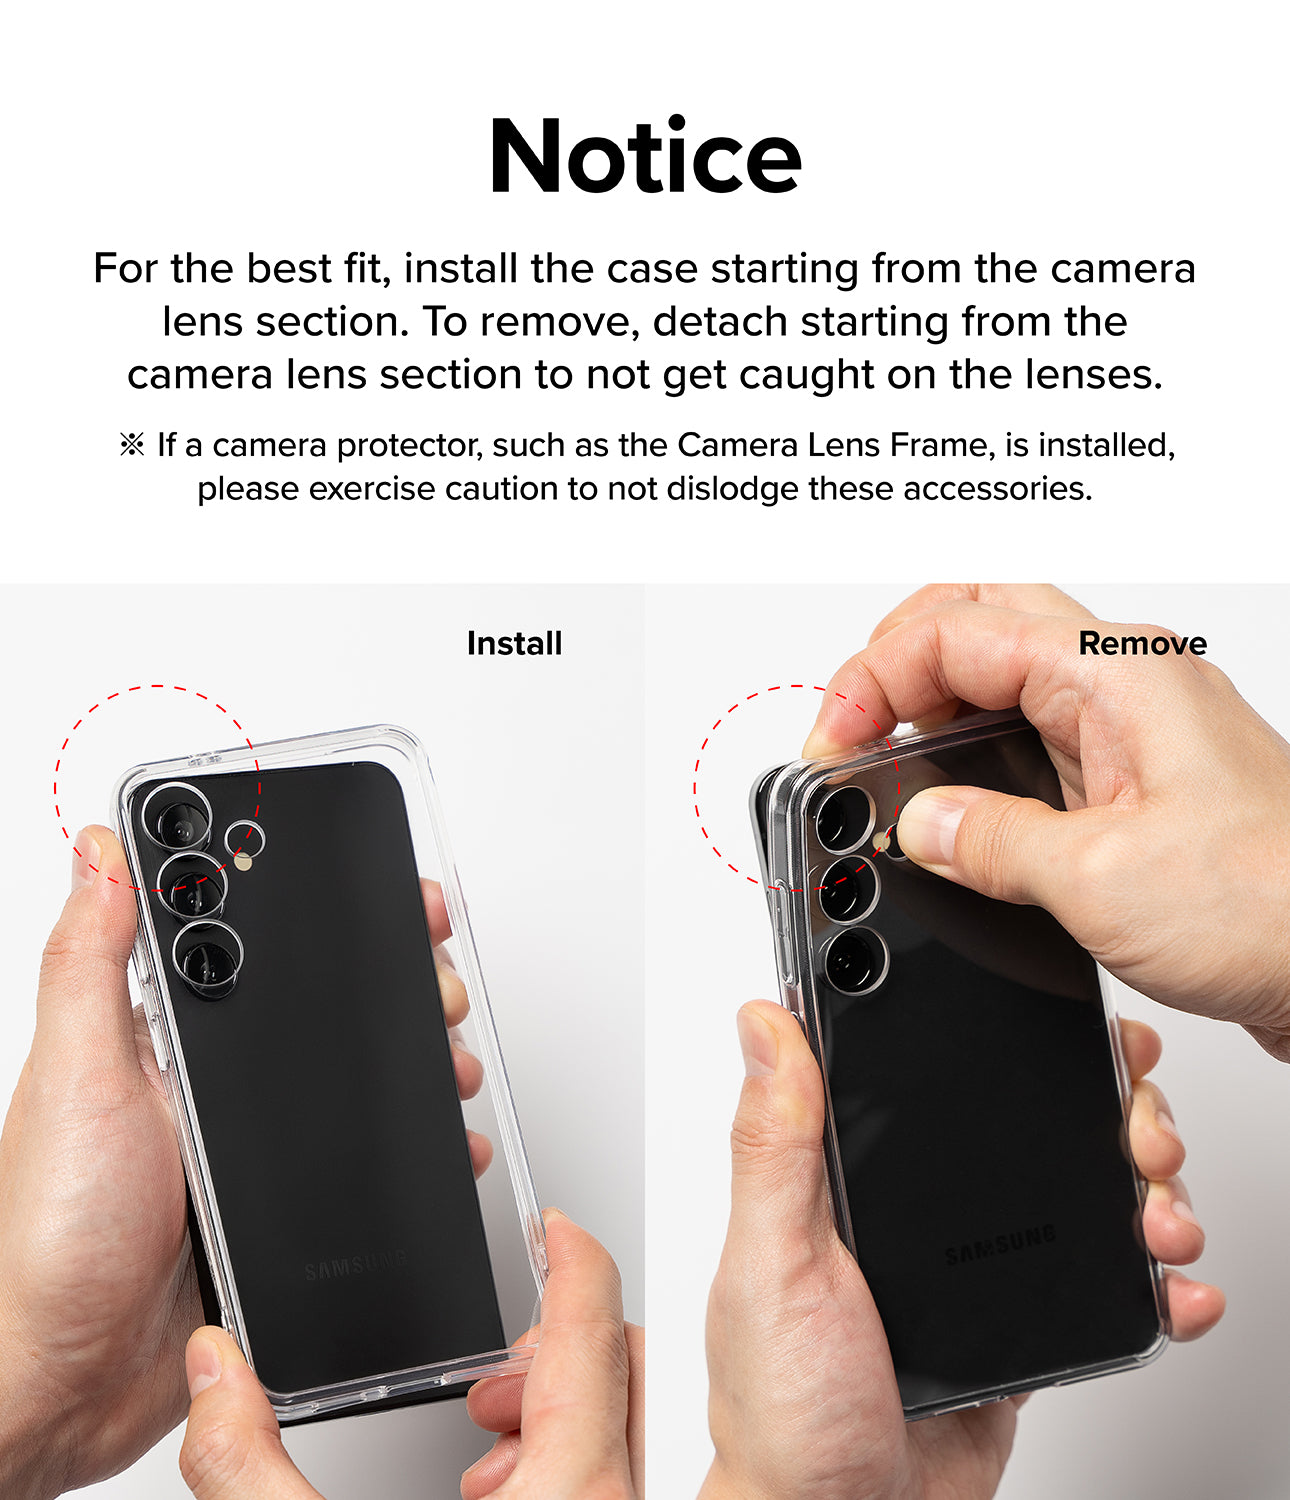 Galaxy S24 Plus Case | Onyx - Navy - Notice. For the best fit, install the case starting from the camera lens section. To remove, detach starting from the camera lens section to not get caught on the lenses.